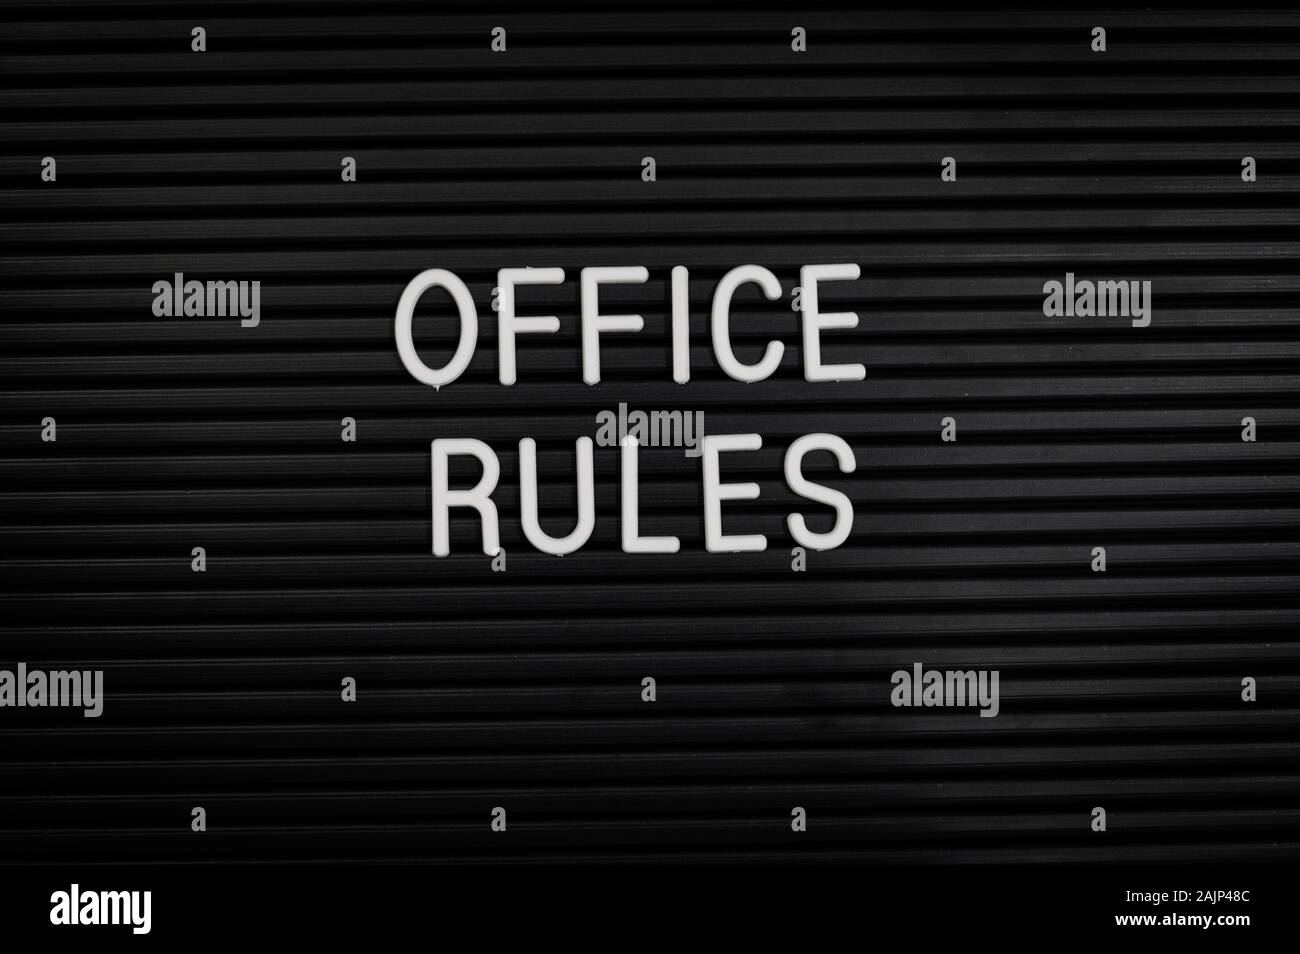 office rules on a black letterboard Stock Photo